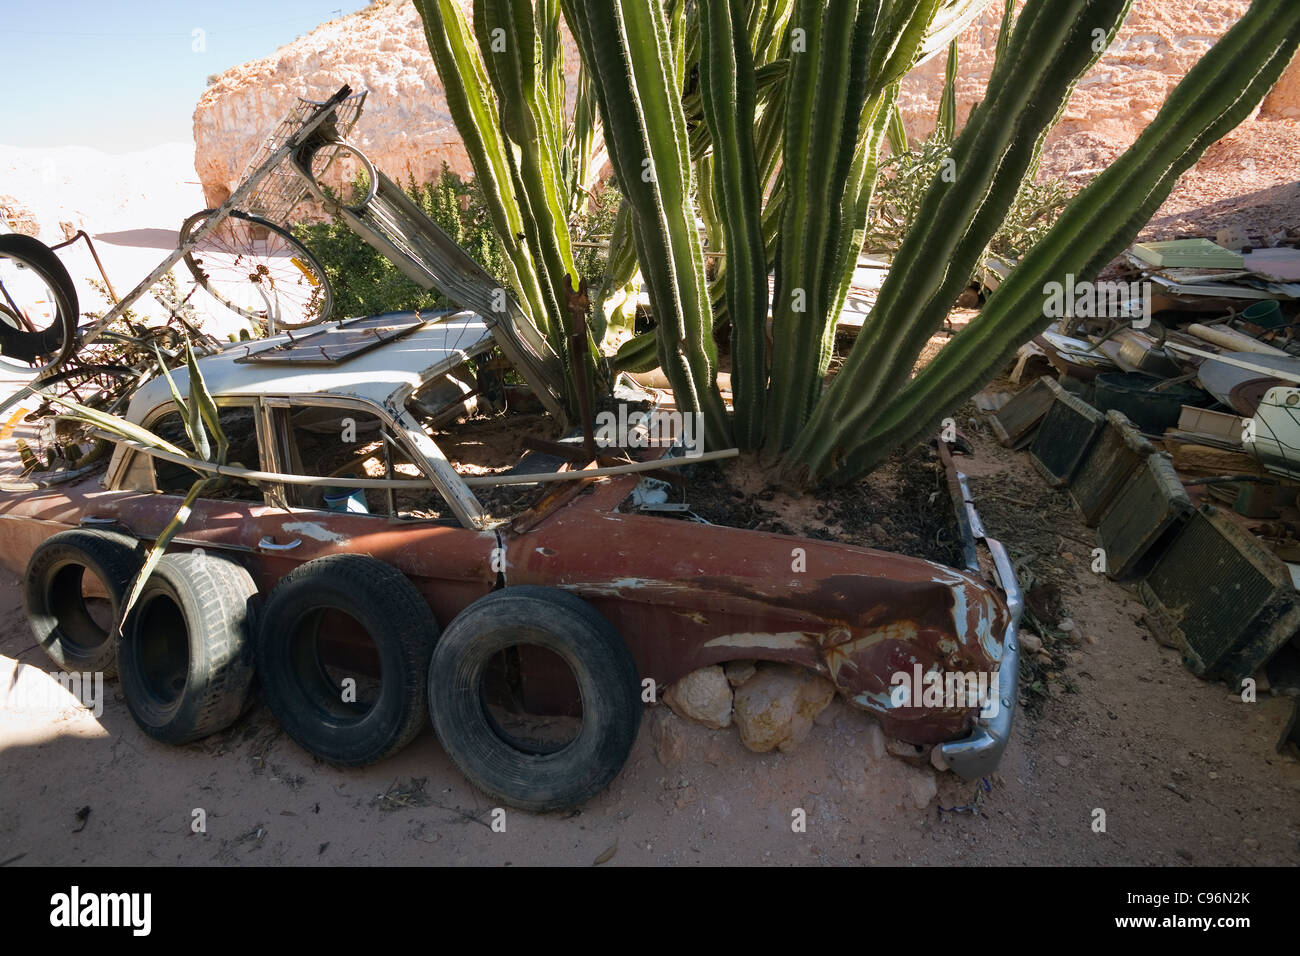 Cactii growing out of a wrecked car in the quirky desert garden of Crocodile Harry.  Coober Pedy, South Australia, Australia Stock Photo